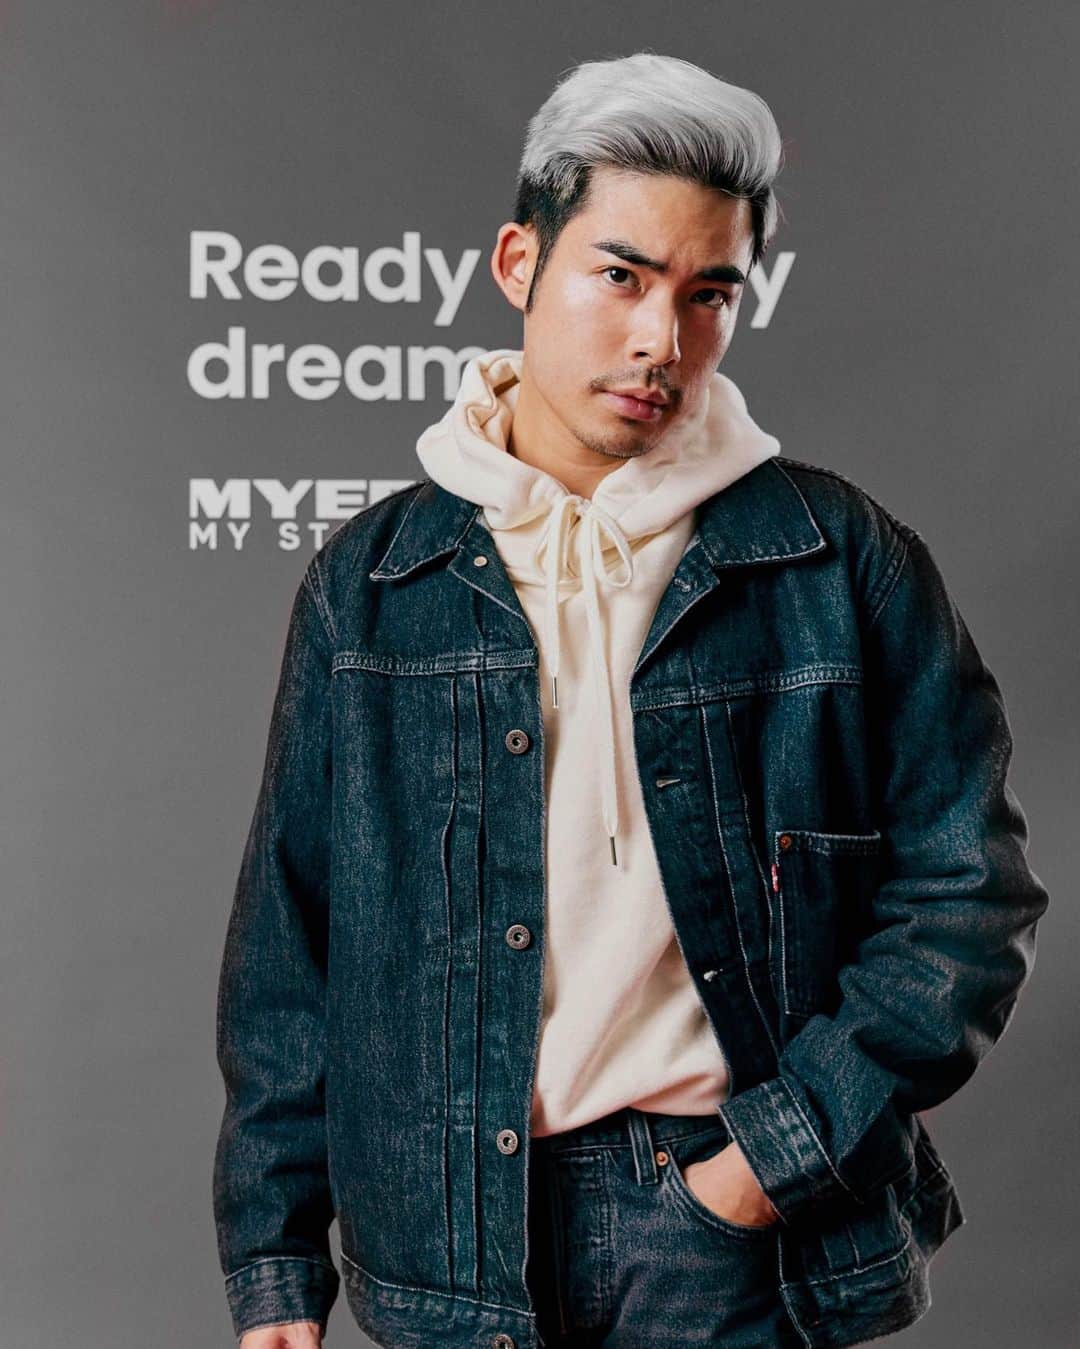 Christoffer Chengのインスタグラム：「Have you ever found it difficult to pick the perfect denim pieces for your wardrobe? Definitely consider to pay a visit to the @myer denim experience, where a stylist offers personalised styling advice to create your dream denim look 🥳」